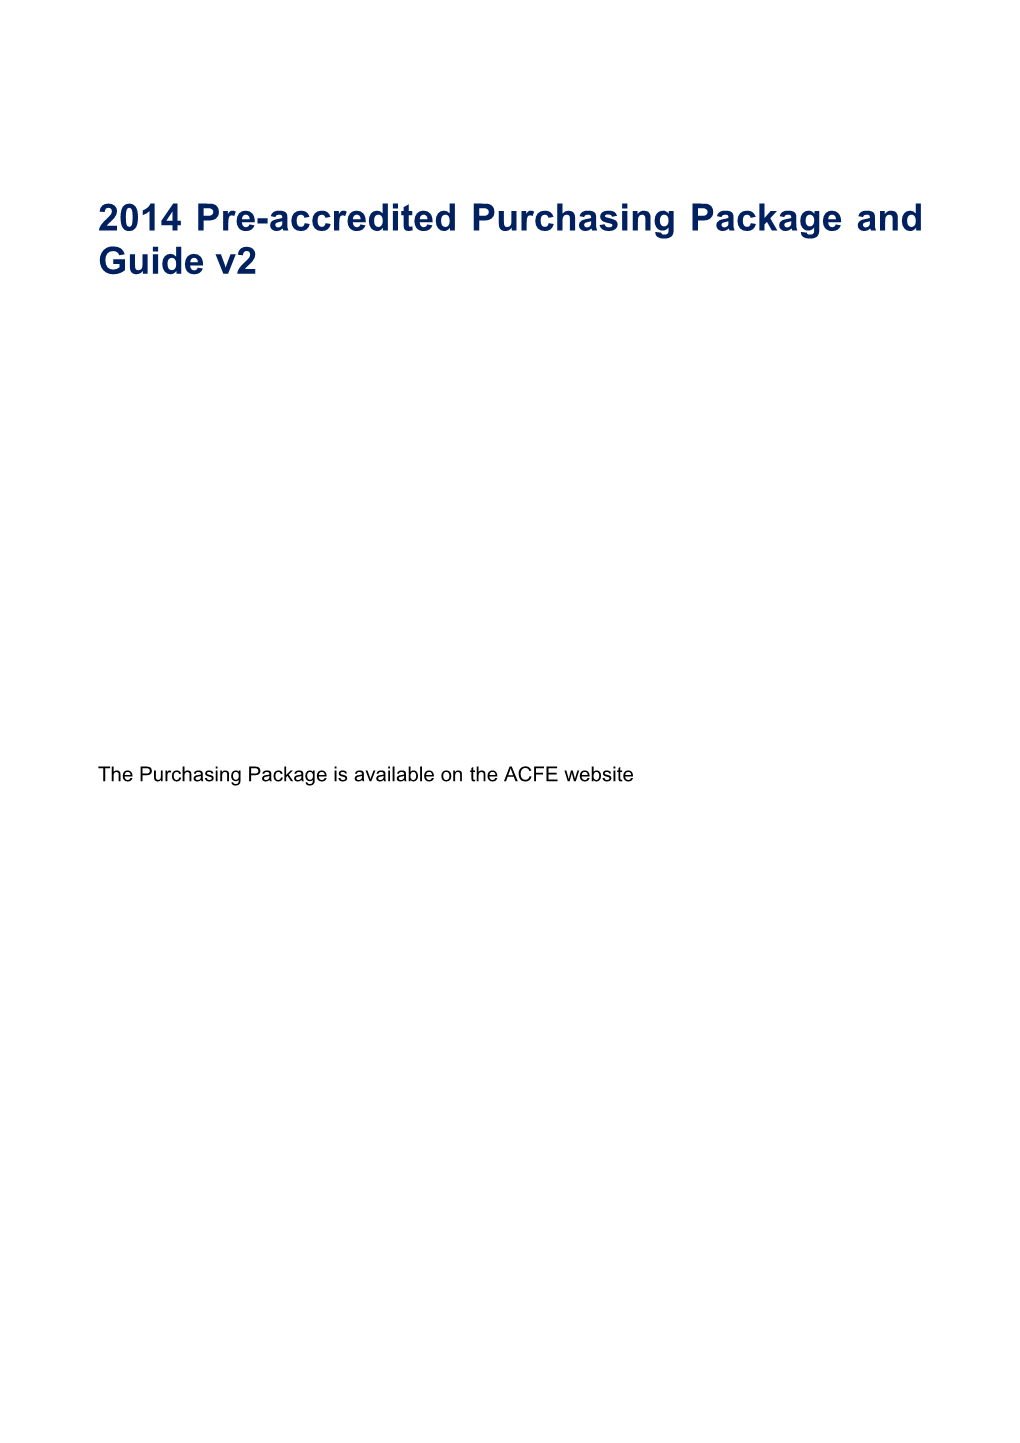 ACFE Pre-Accredited Purchasing Package And Guide 2014